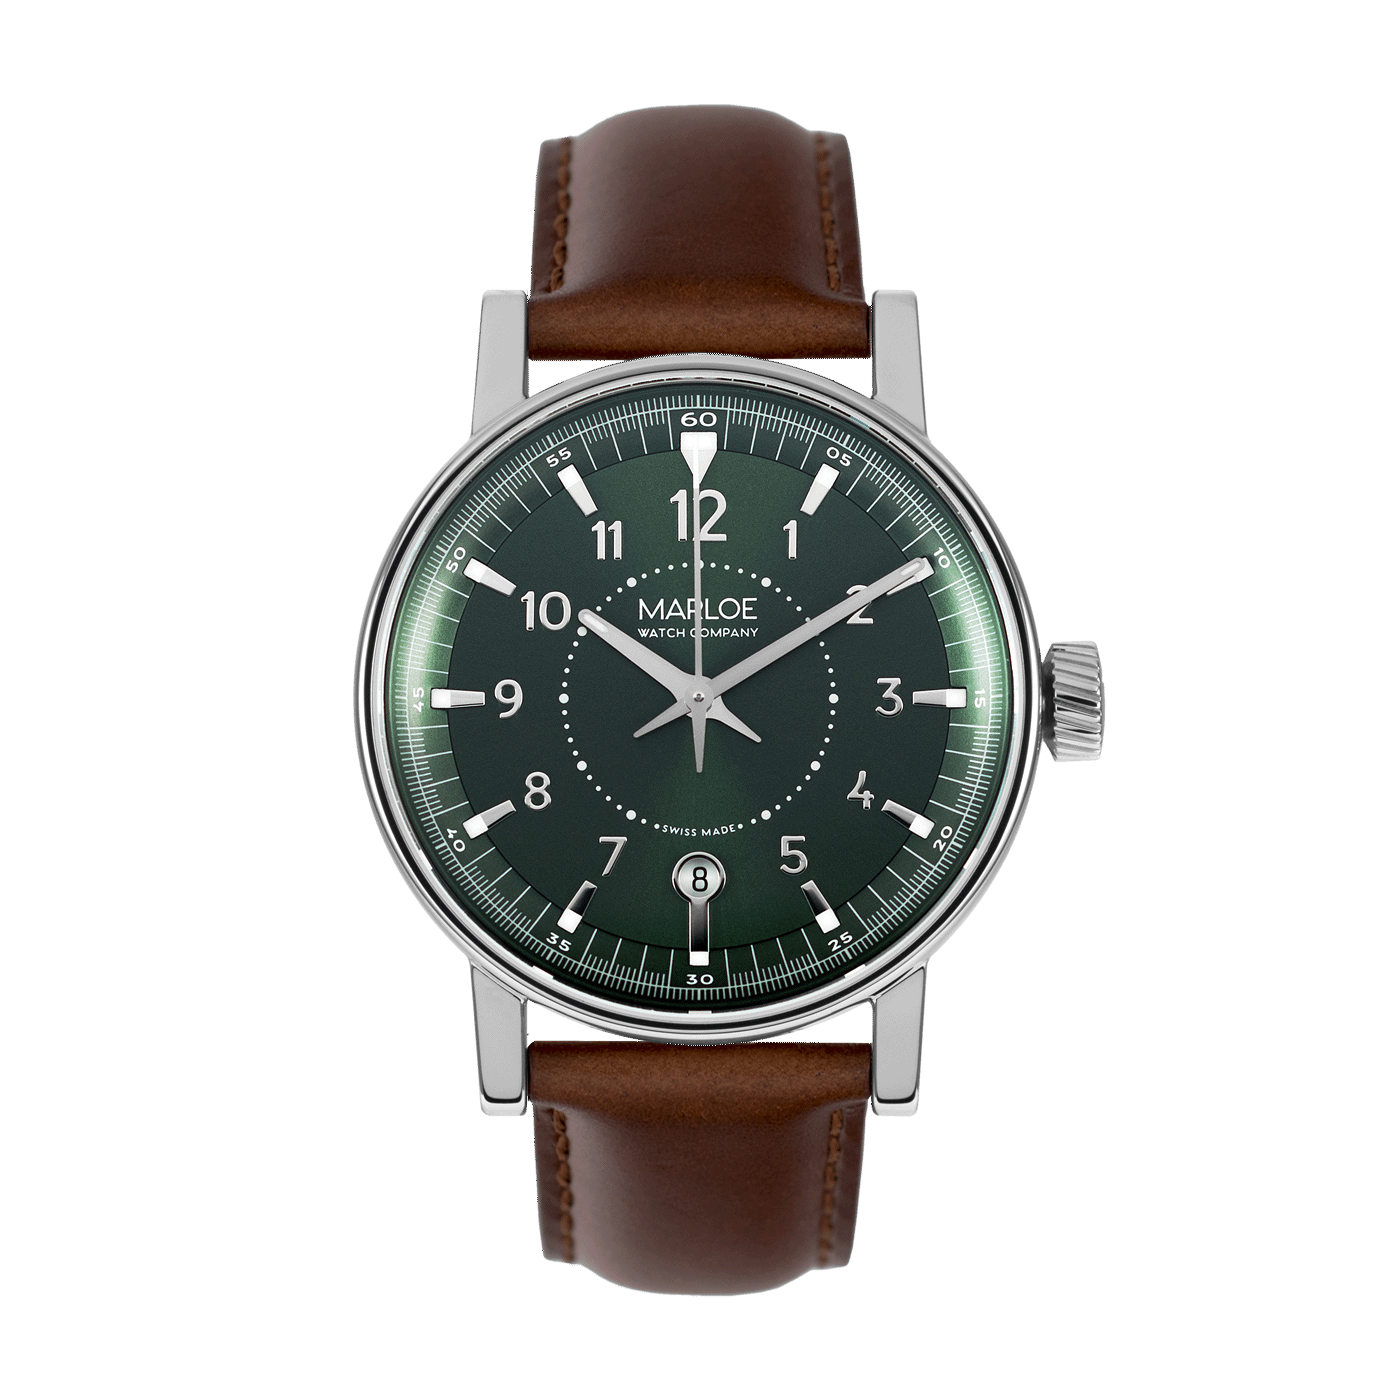 Haskell green marloe company. See clipart expensive watch